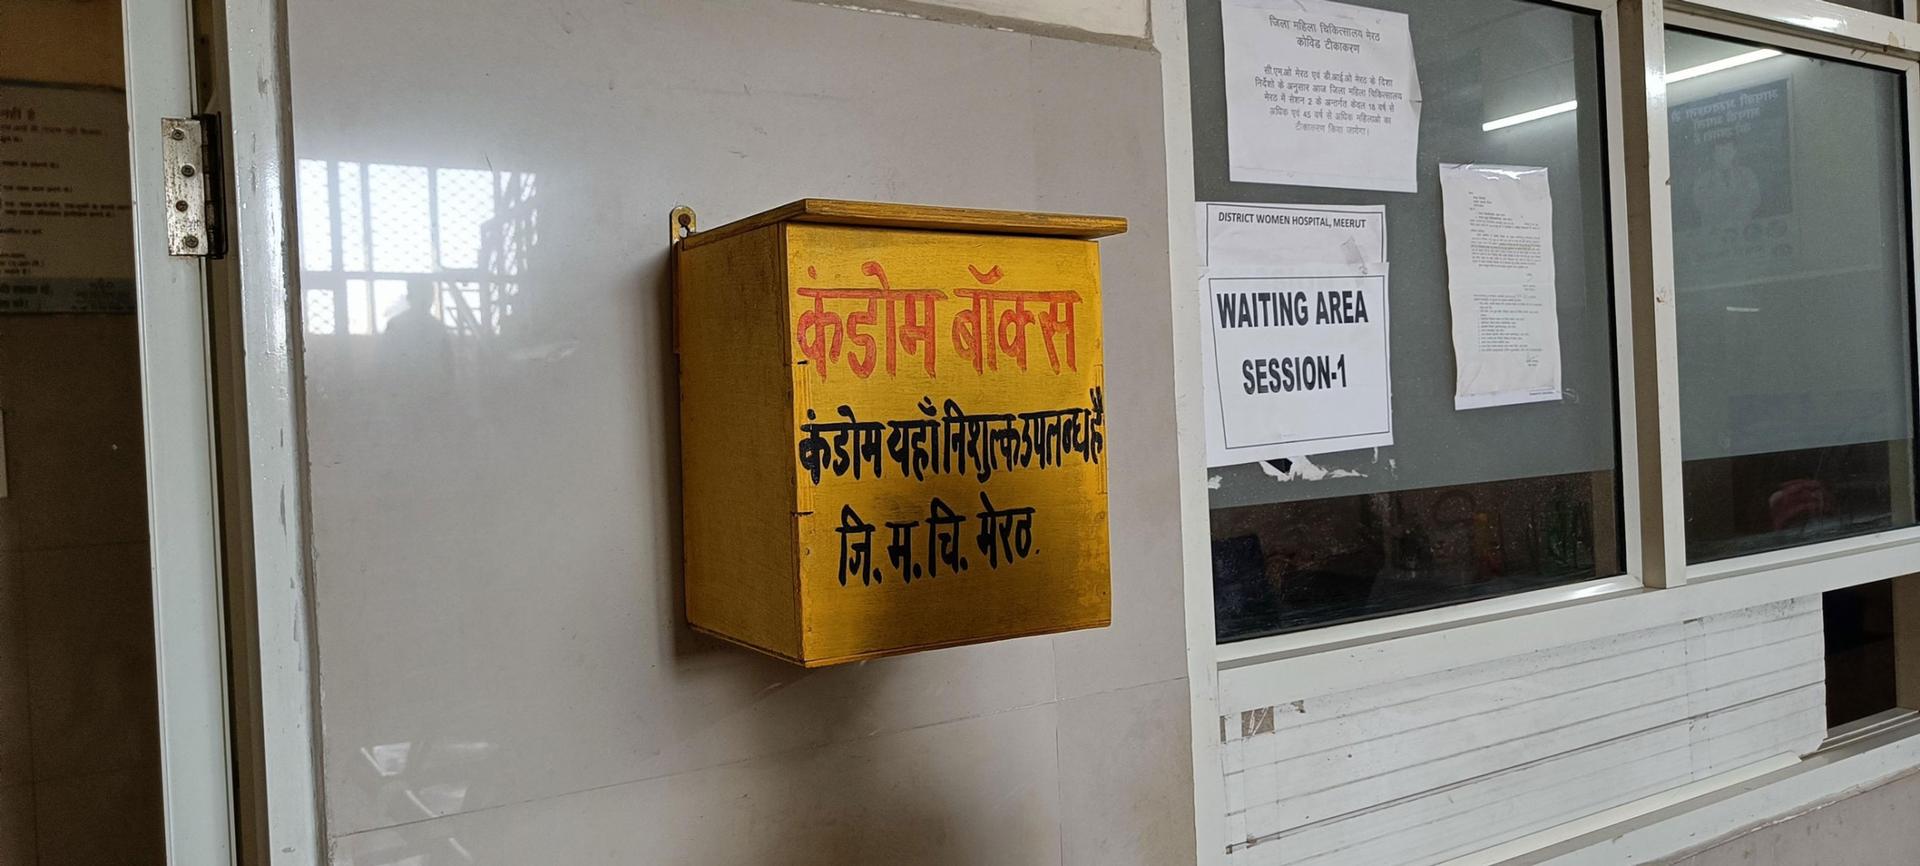 Wooden boxes full of free condoms are mounted on the walls on Meerut's district women's hospital.